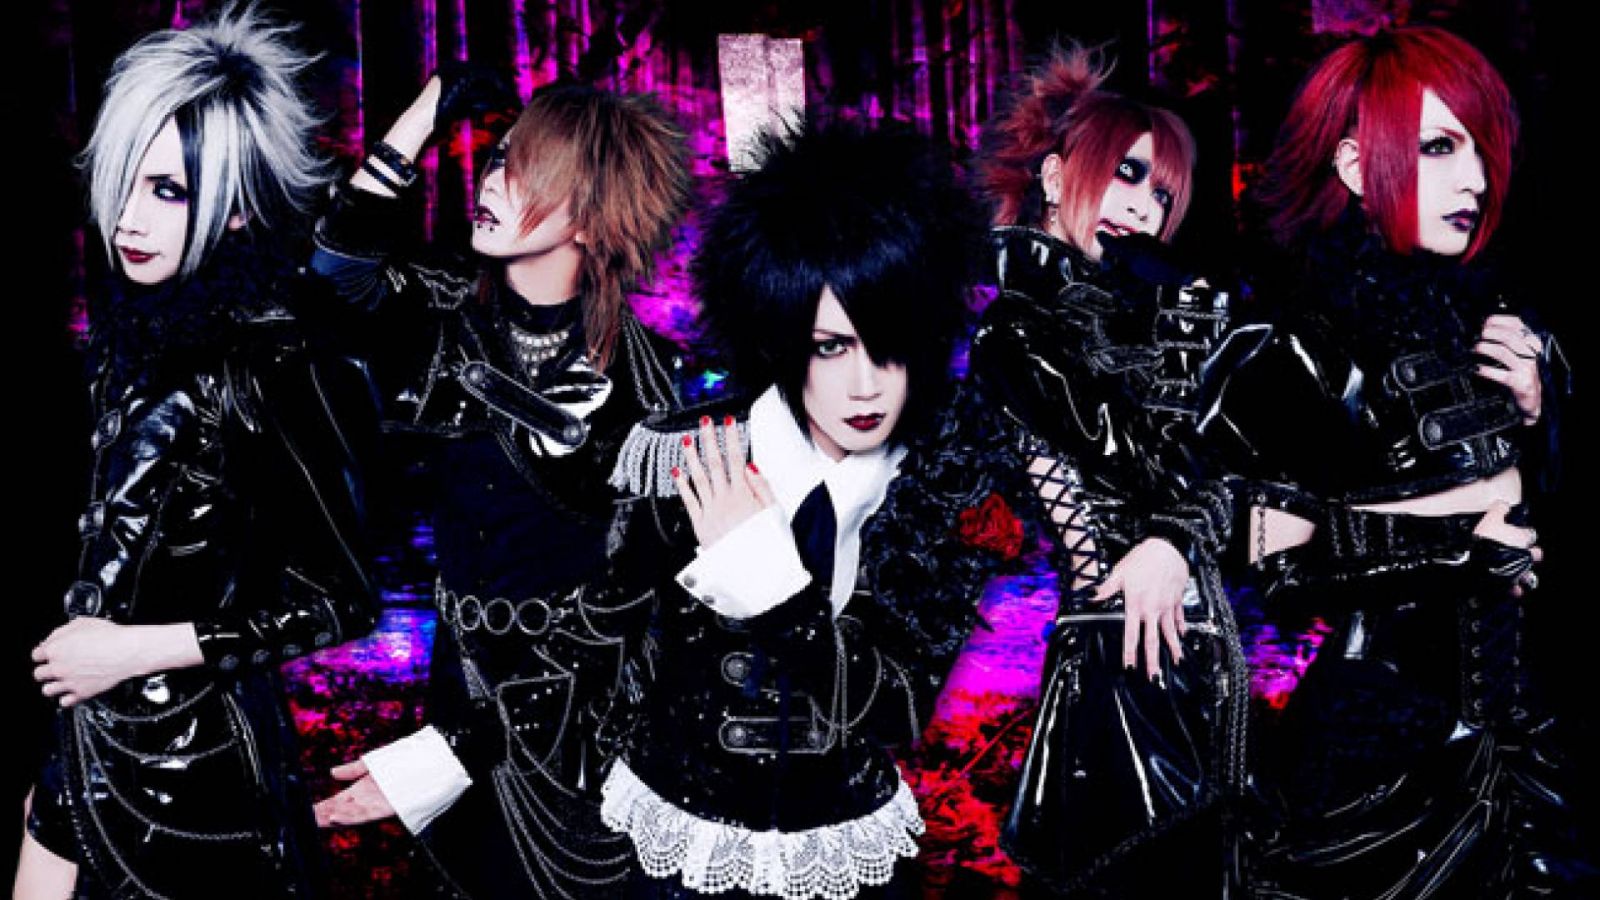 New Album from MeteoroiD © 2015 MeteoroiD. All rights reserved.